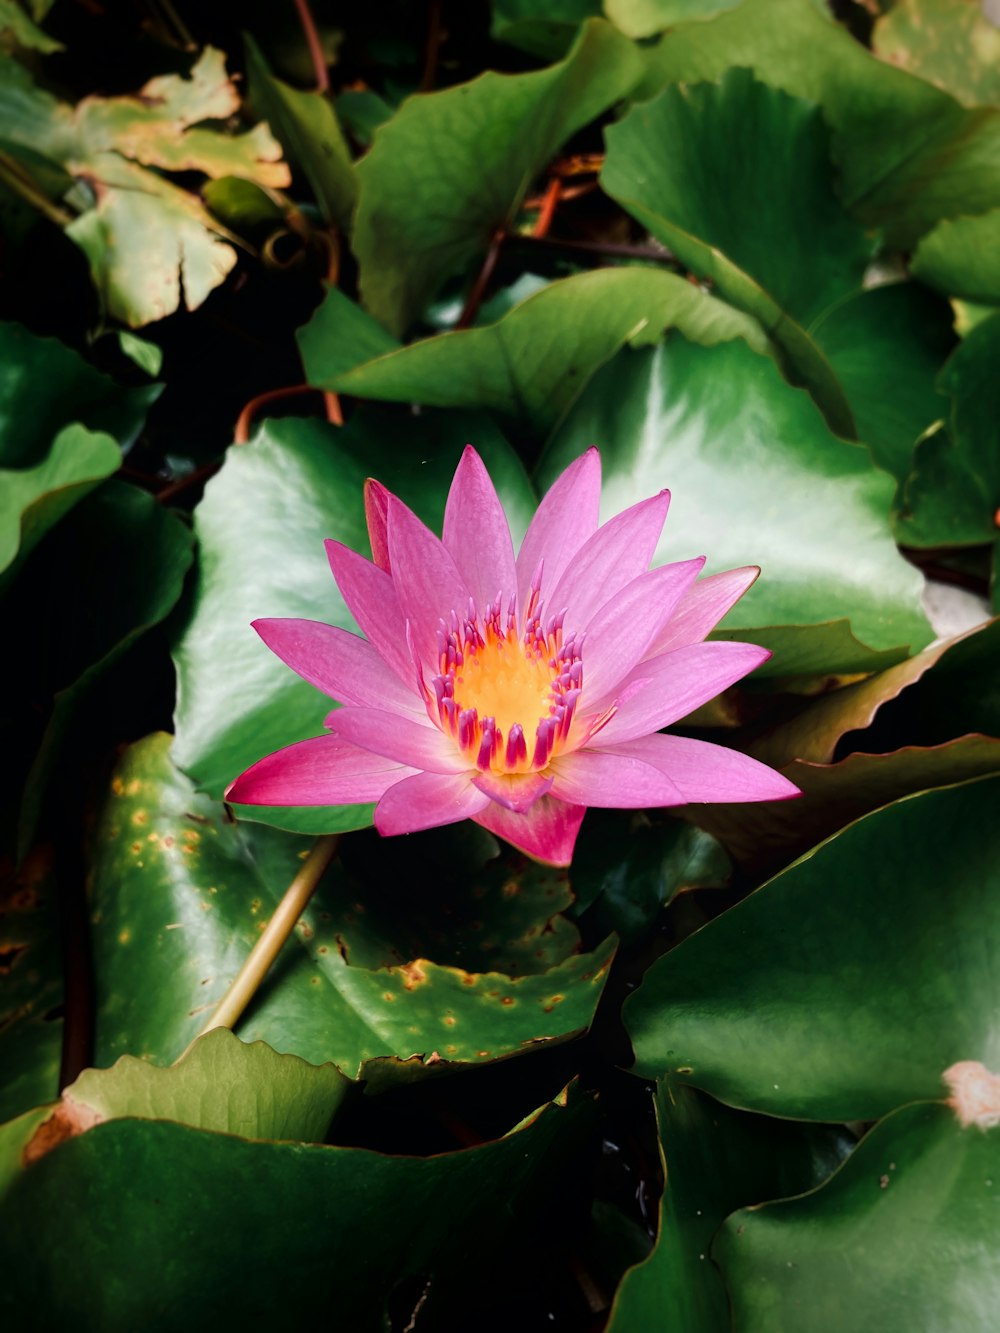 a pink flower surrounded by green leaves